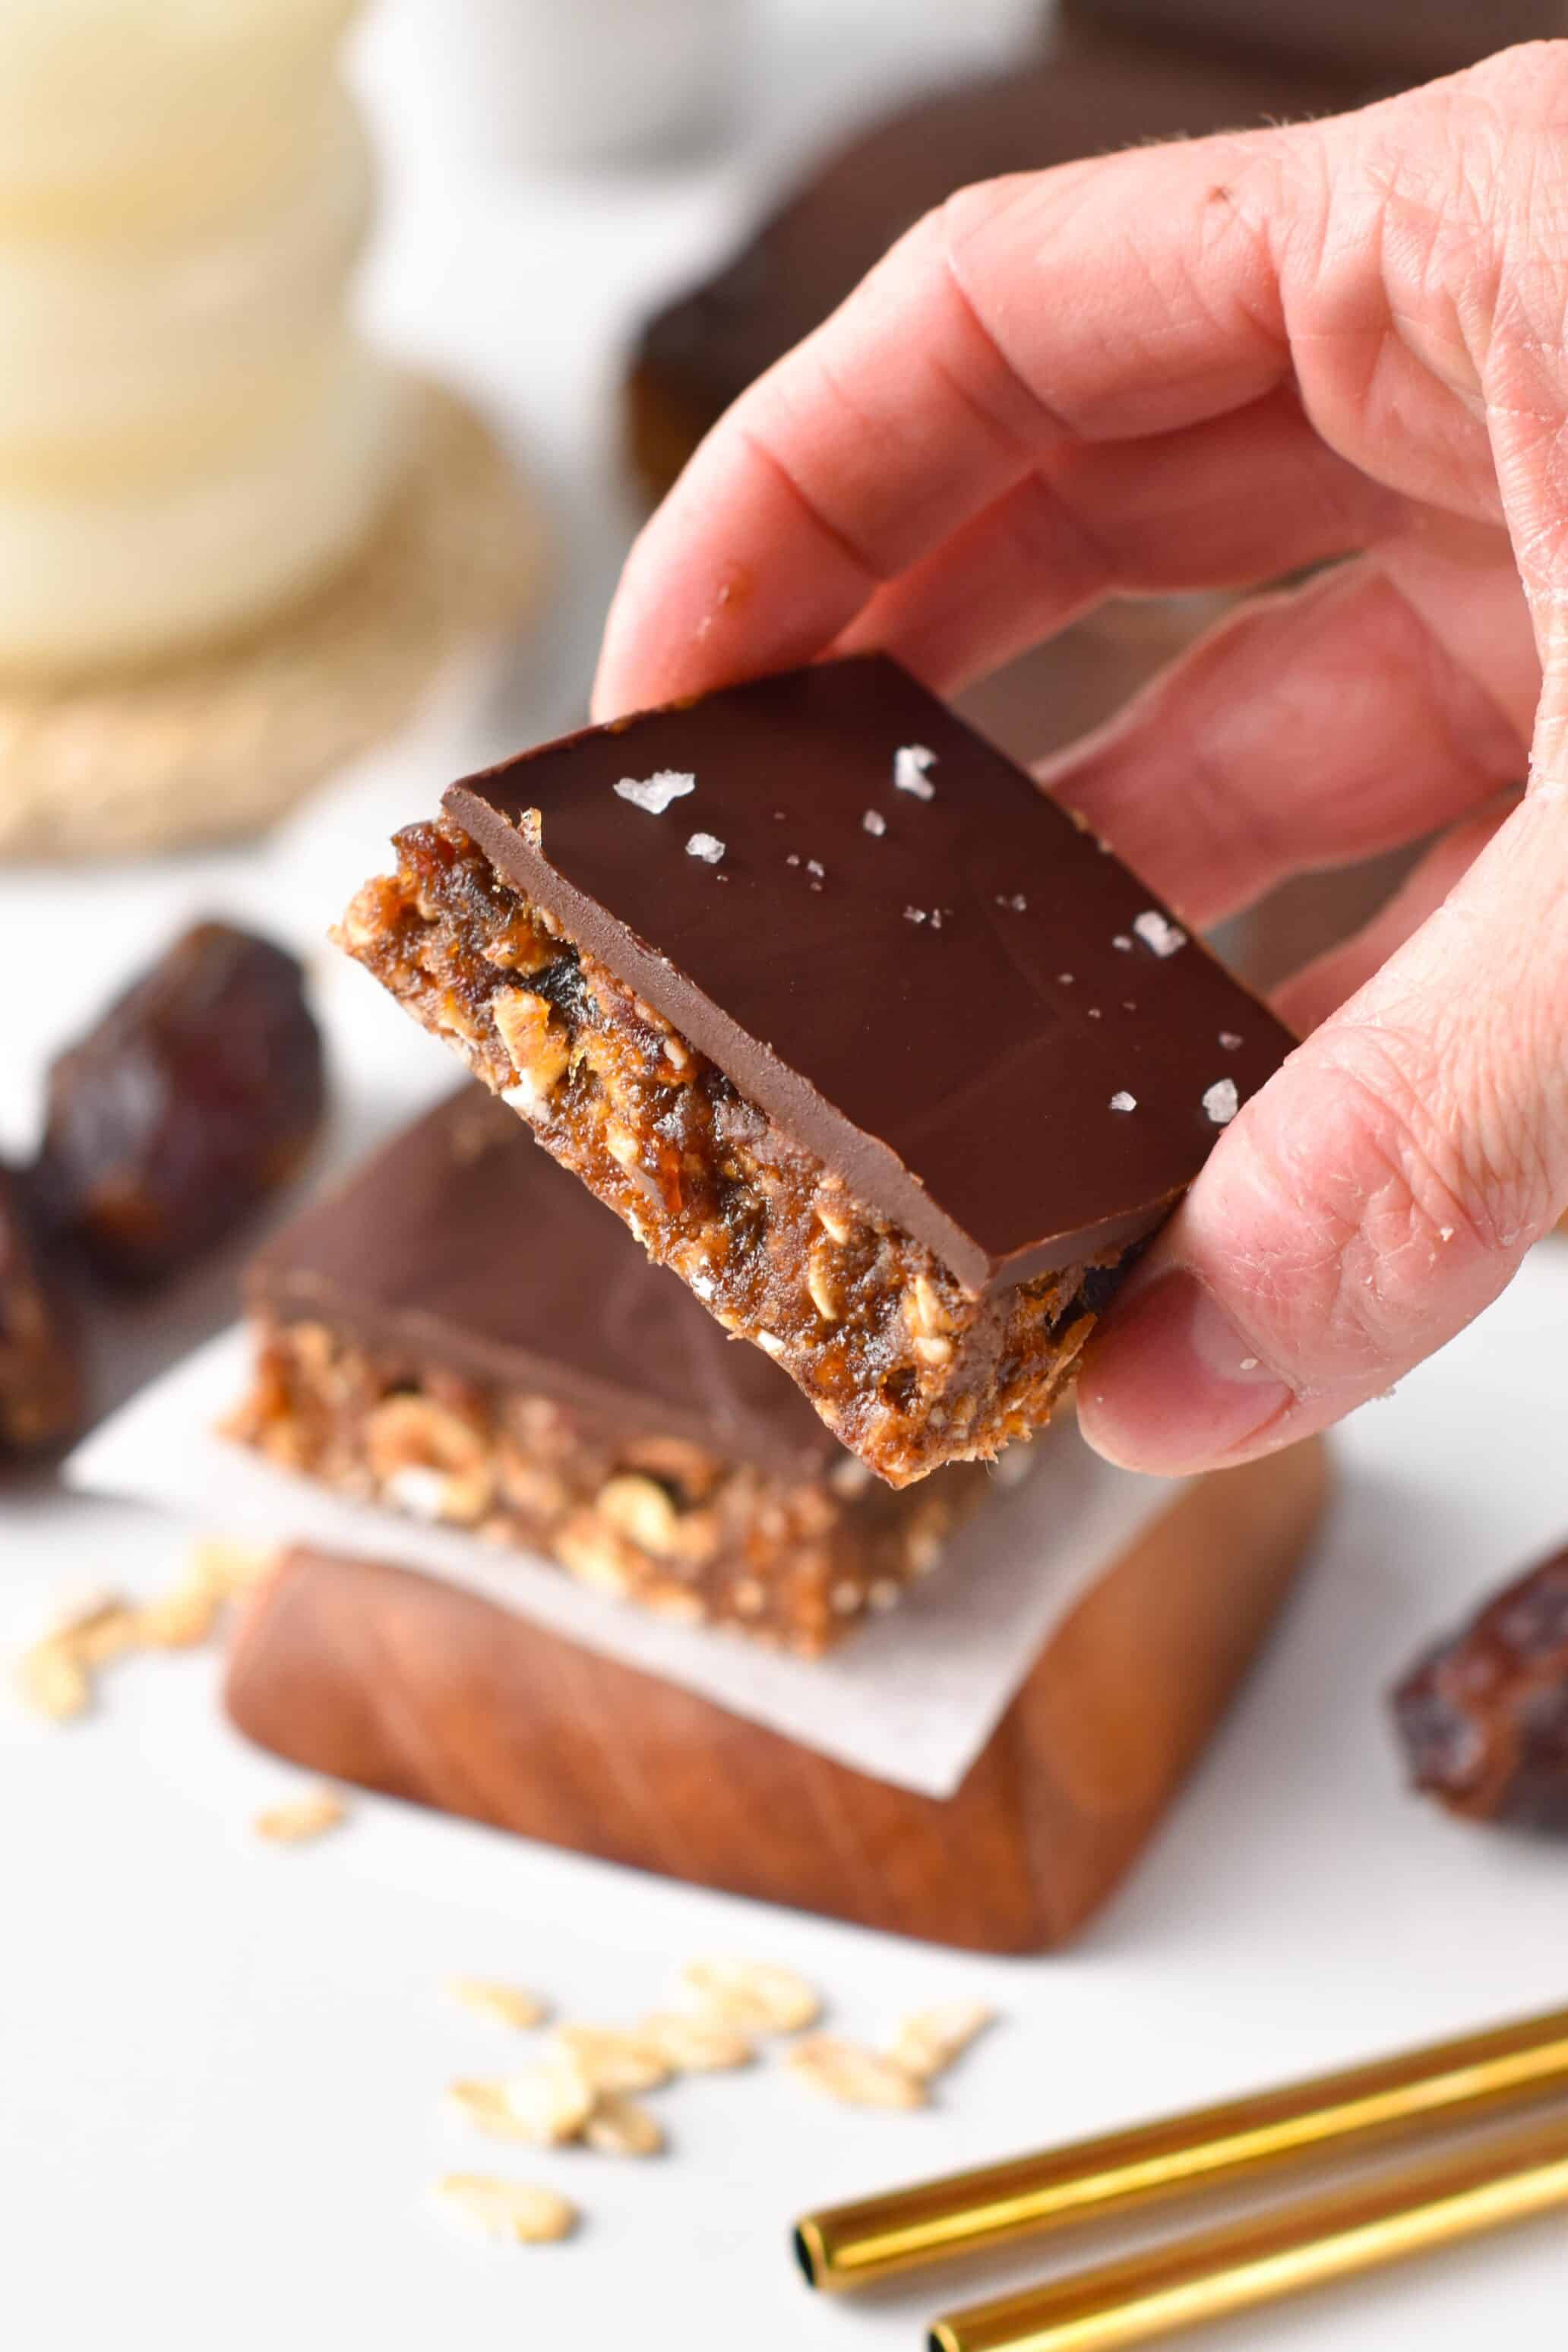 These healthy date bars are the most healthy sweet treat ever, packed with fiber, vitamins, and antioxidants